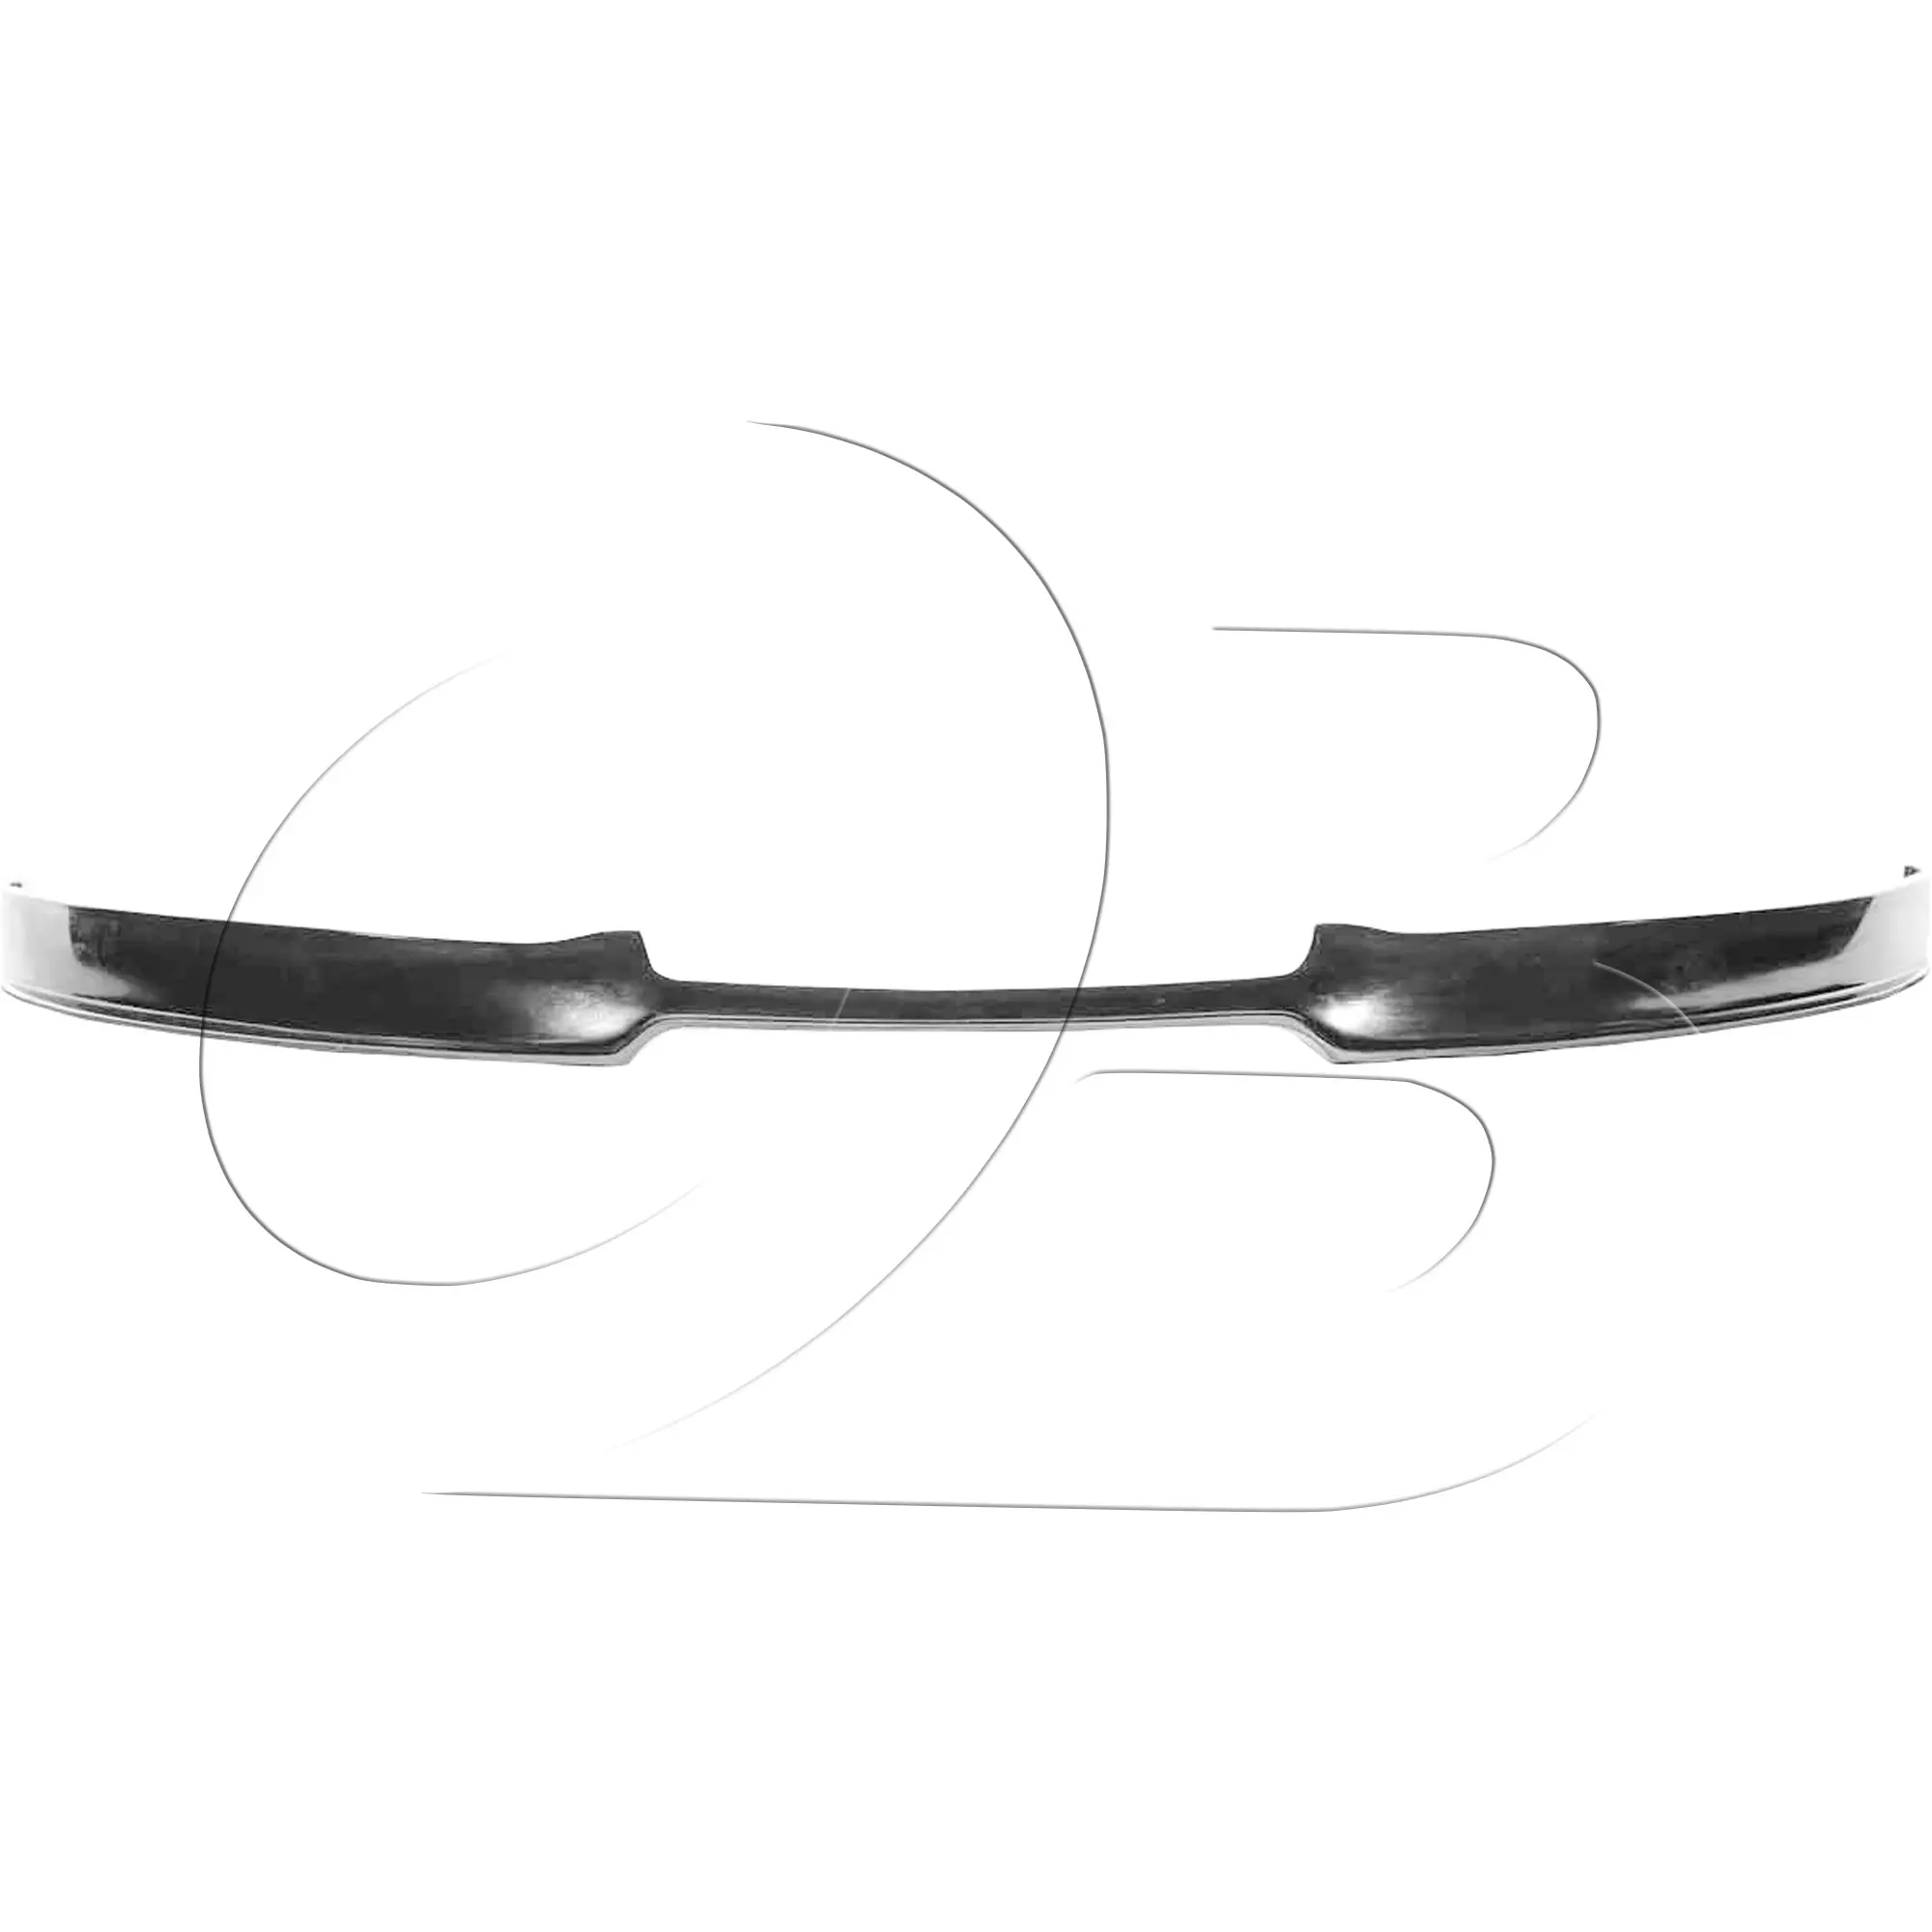 KBD Urethane BDS Style 1pc Front Lip > Ford Focus 2012-2014 - Image 6